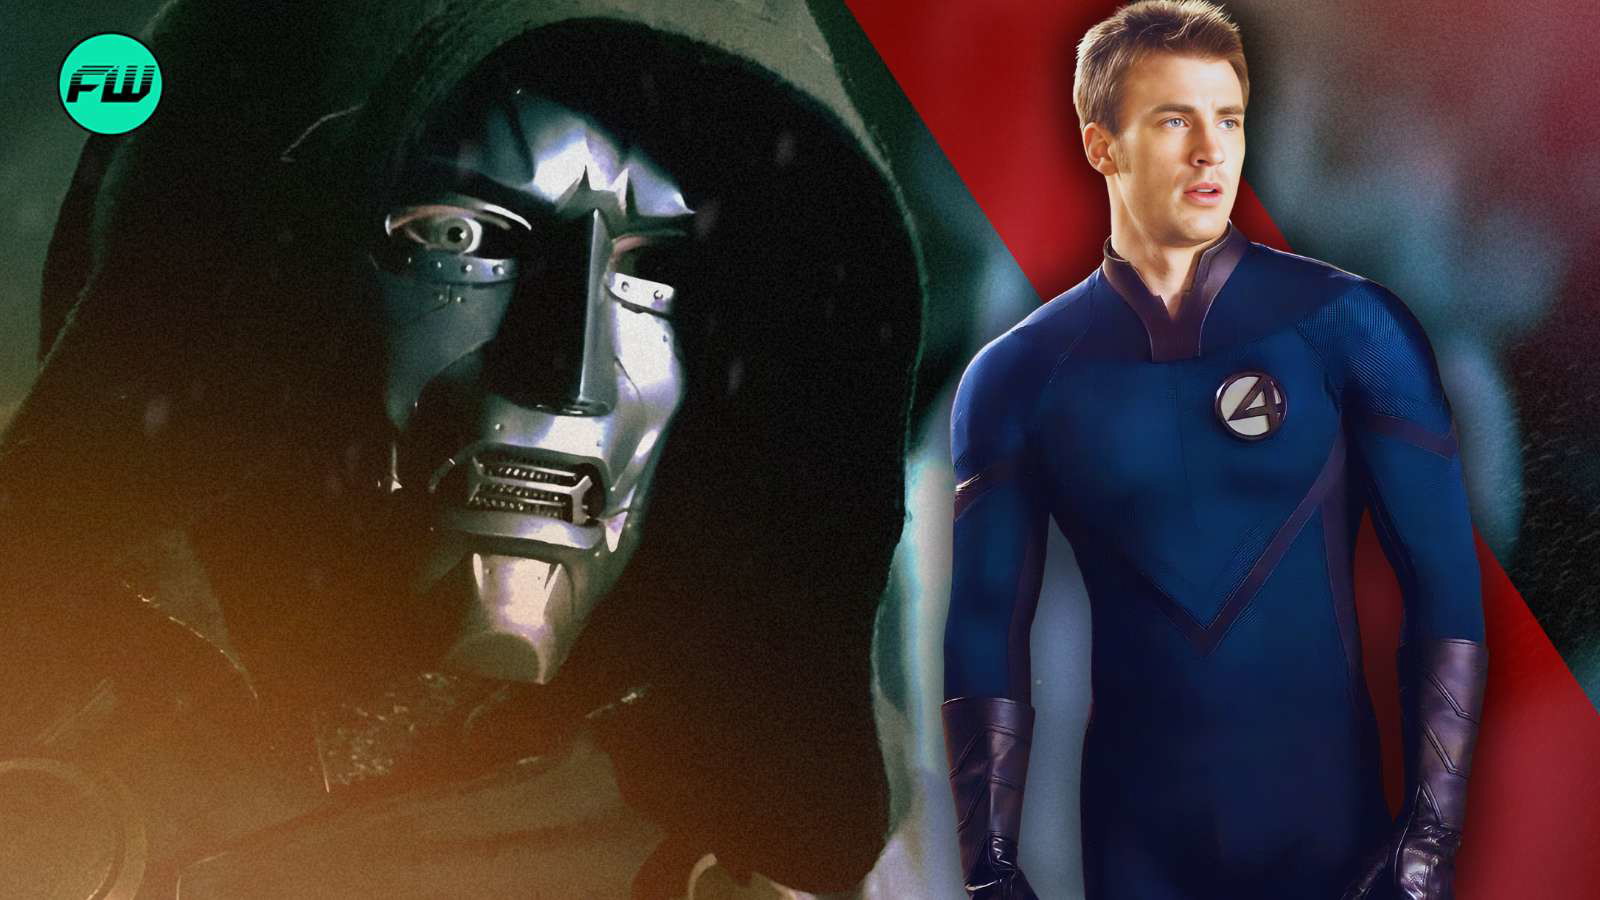 “What the hell were they thinking?”: Chris Evans’ Human Torch Meets Victor Von Doom in Fantastic Four Deleted Scene and We Can All Agree This Should Have Made the Cut